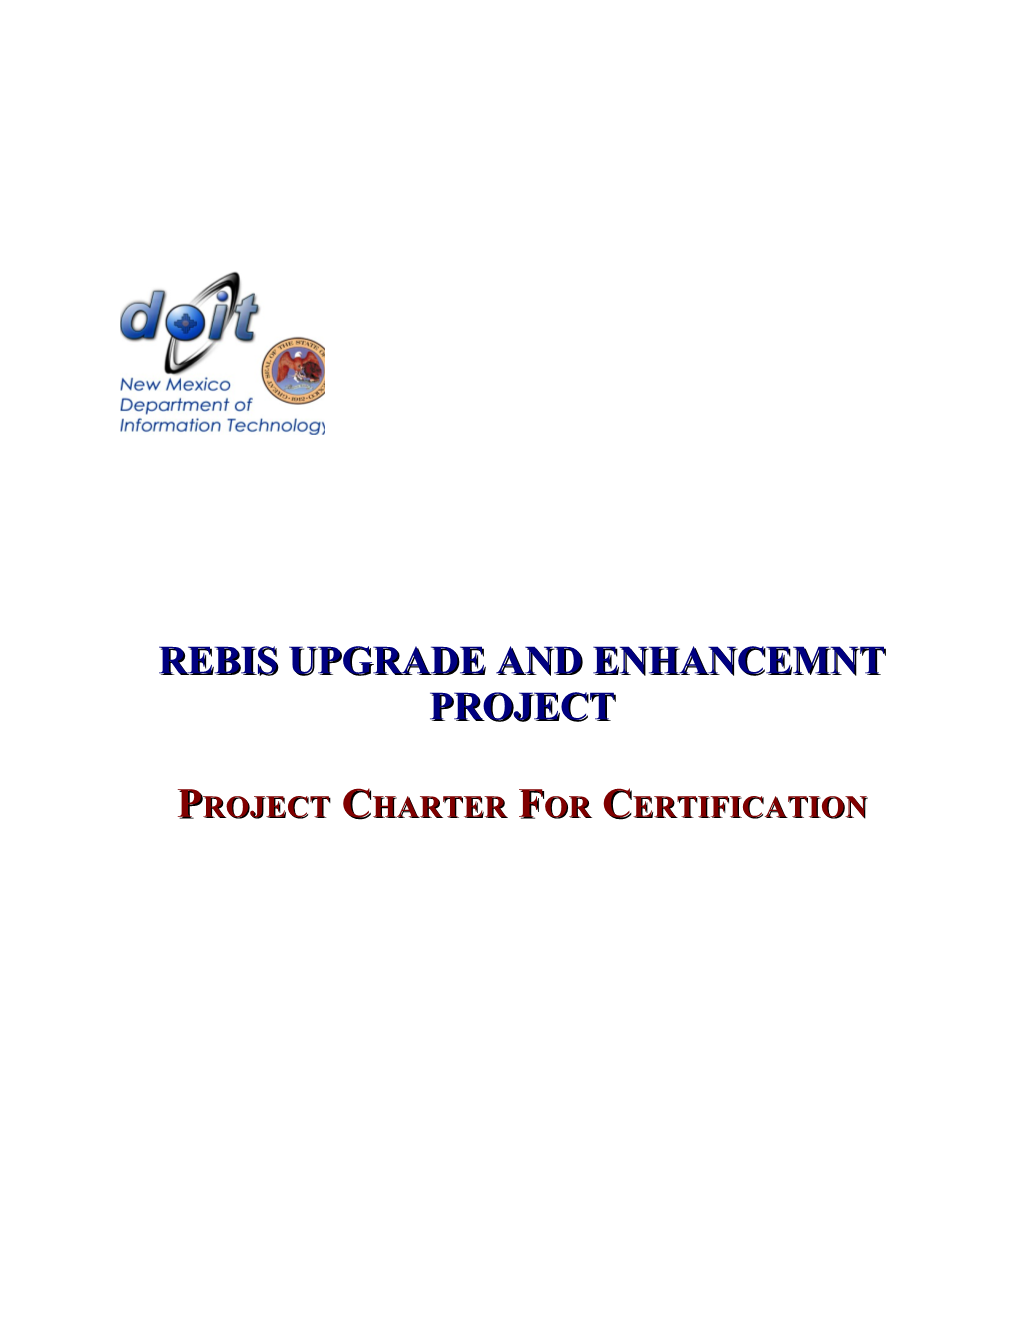 Rebis Upgrade and Enhancemnt Project